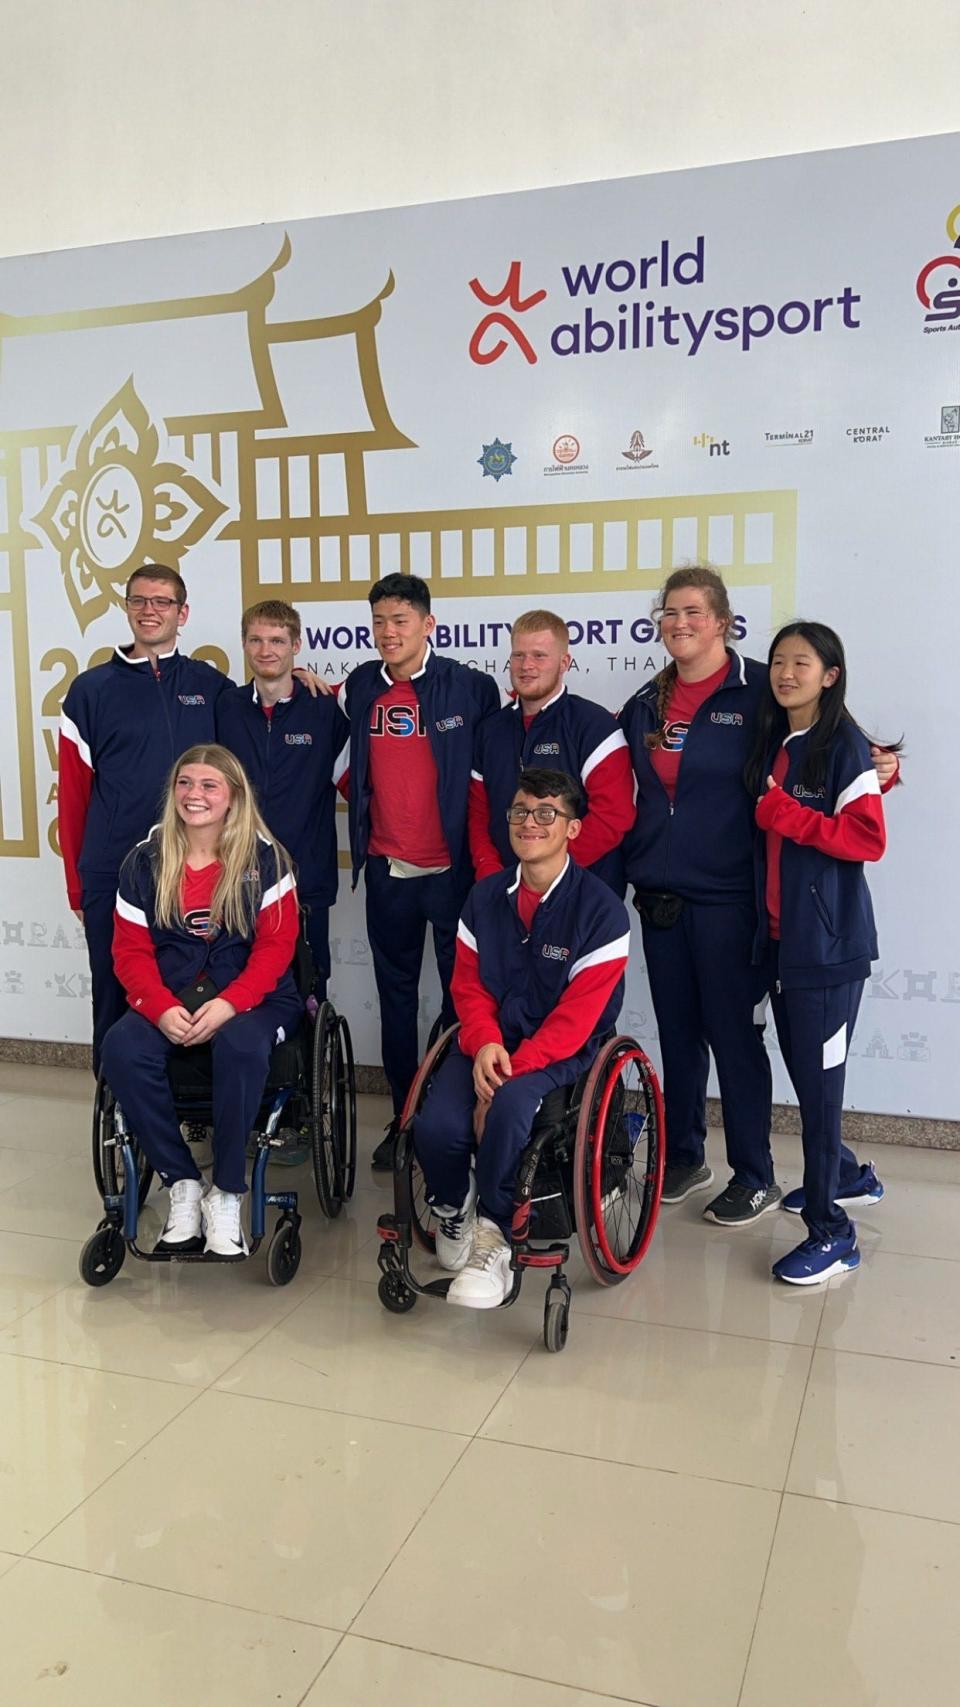 Marquette University High School sophomore Gianni Quintero (front right) poses with Team USA teammates while competing at the World Abilitysport games in Nakhon Ratchasima, Thailand in December.